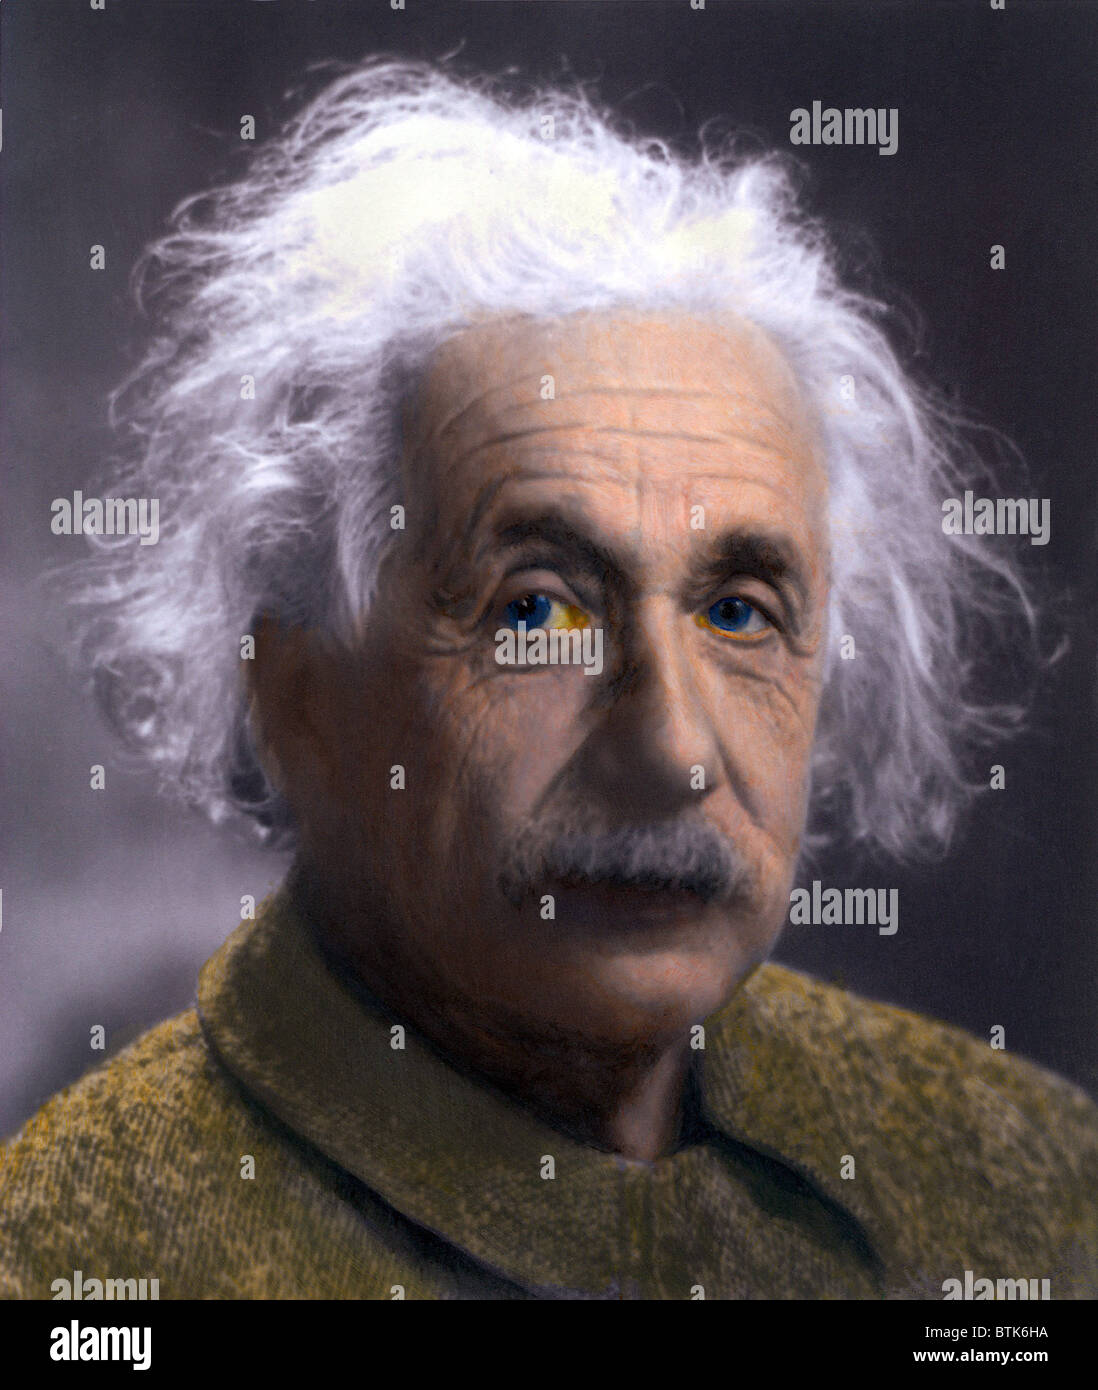 Albert Einstein (1879-1955) portrait taken at Princeton University in 1947. Einstein ended his career at the Institute for Advanced Studies attempting to develop a unified field theory. Stock Photo